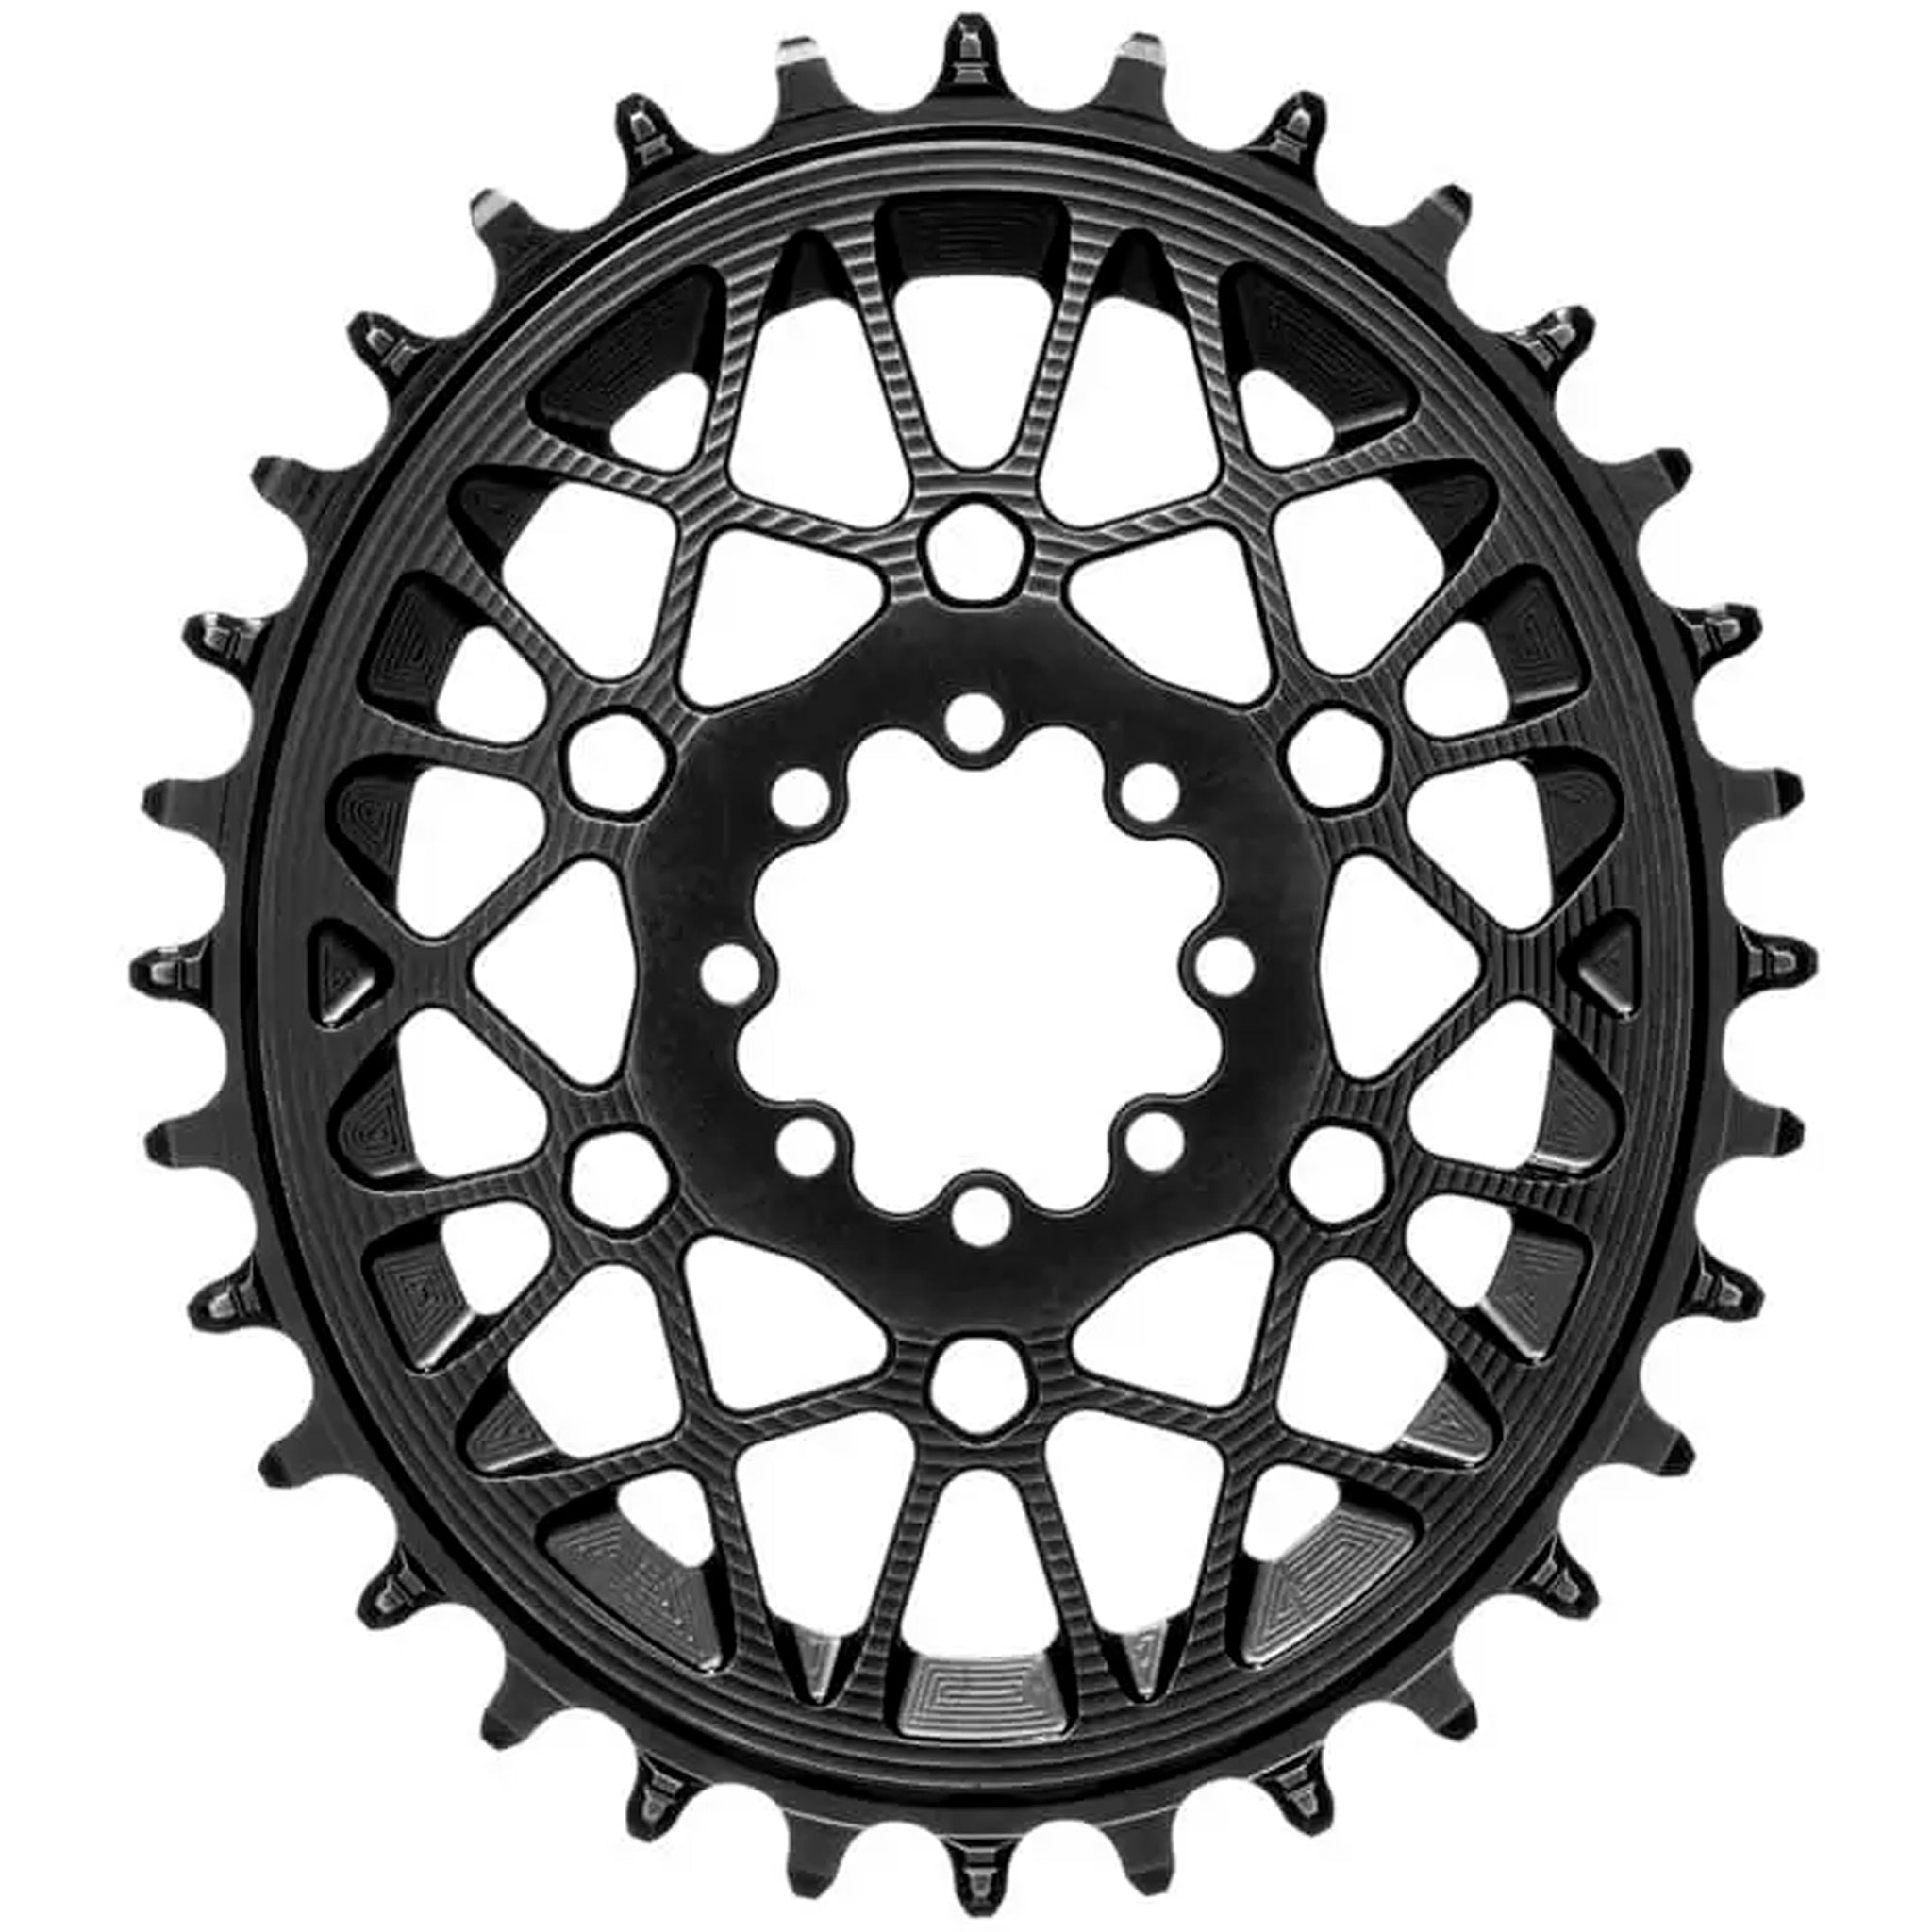 Absolute Black Oval SRAM T-Type DM 8-Hole Boost Chainring 36T Blk